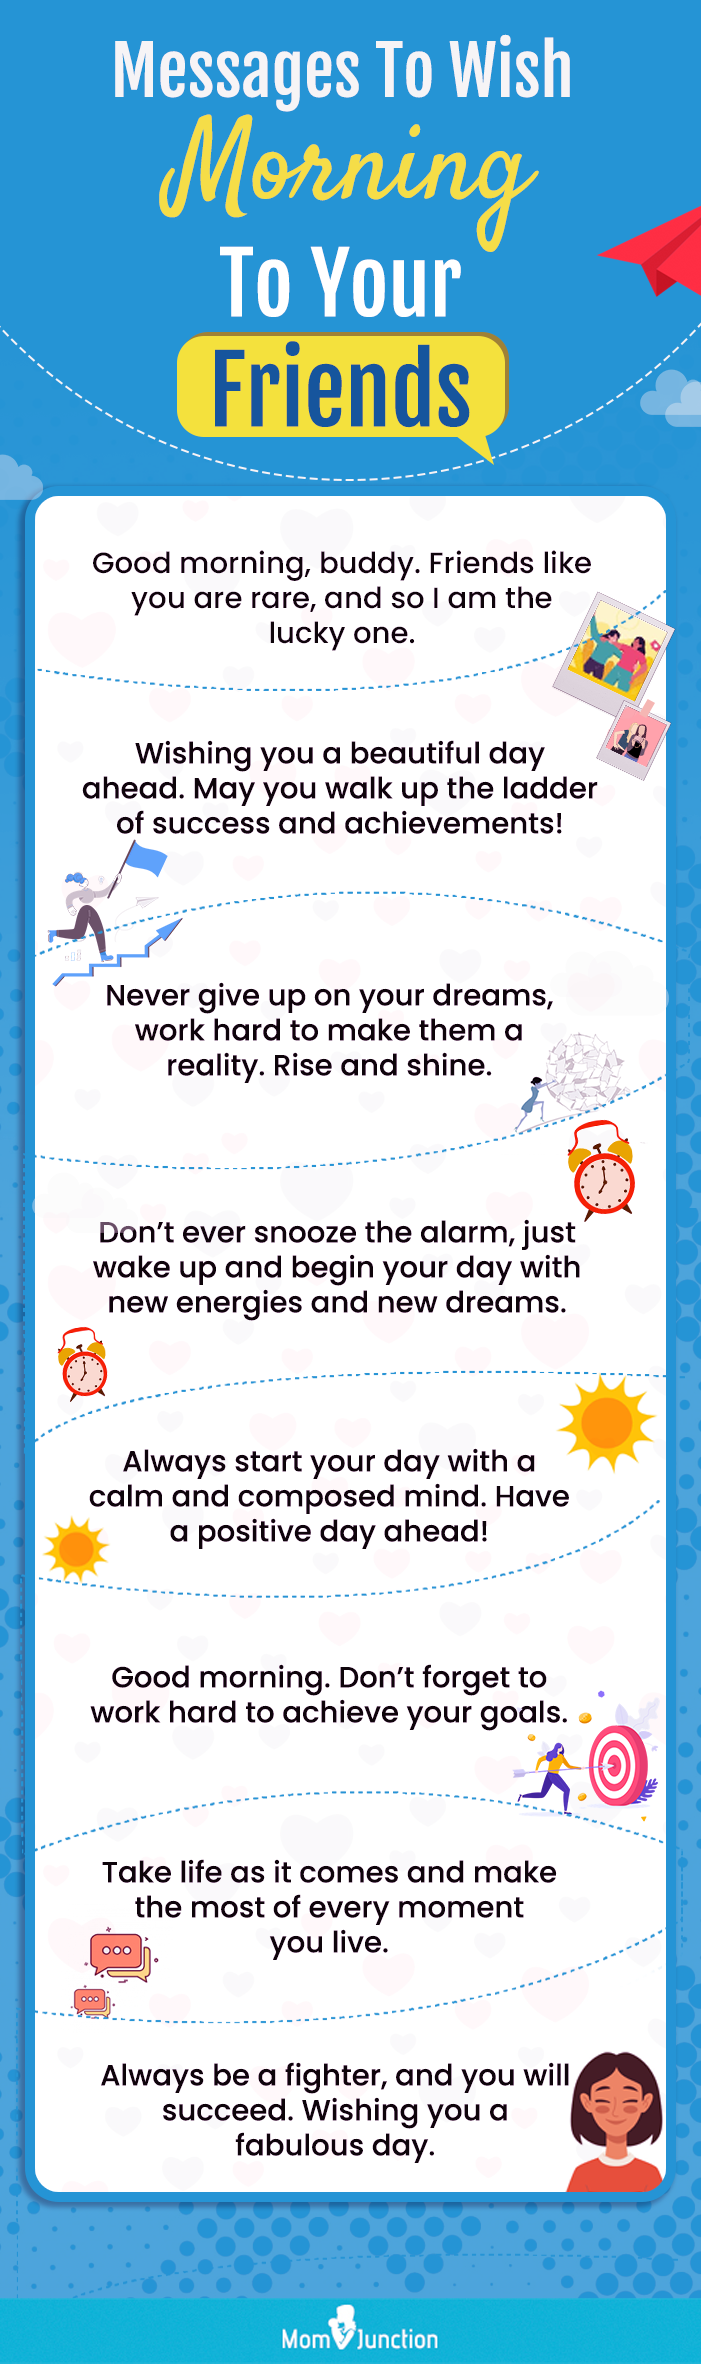 messages to wish a good morning to your friends (infographic)